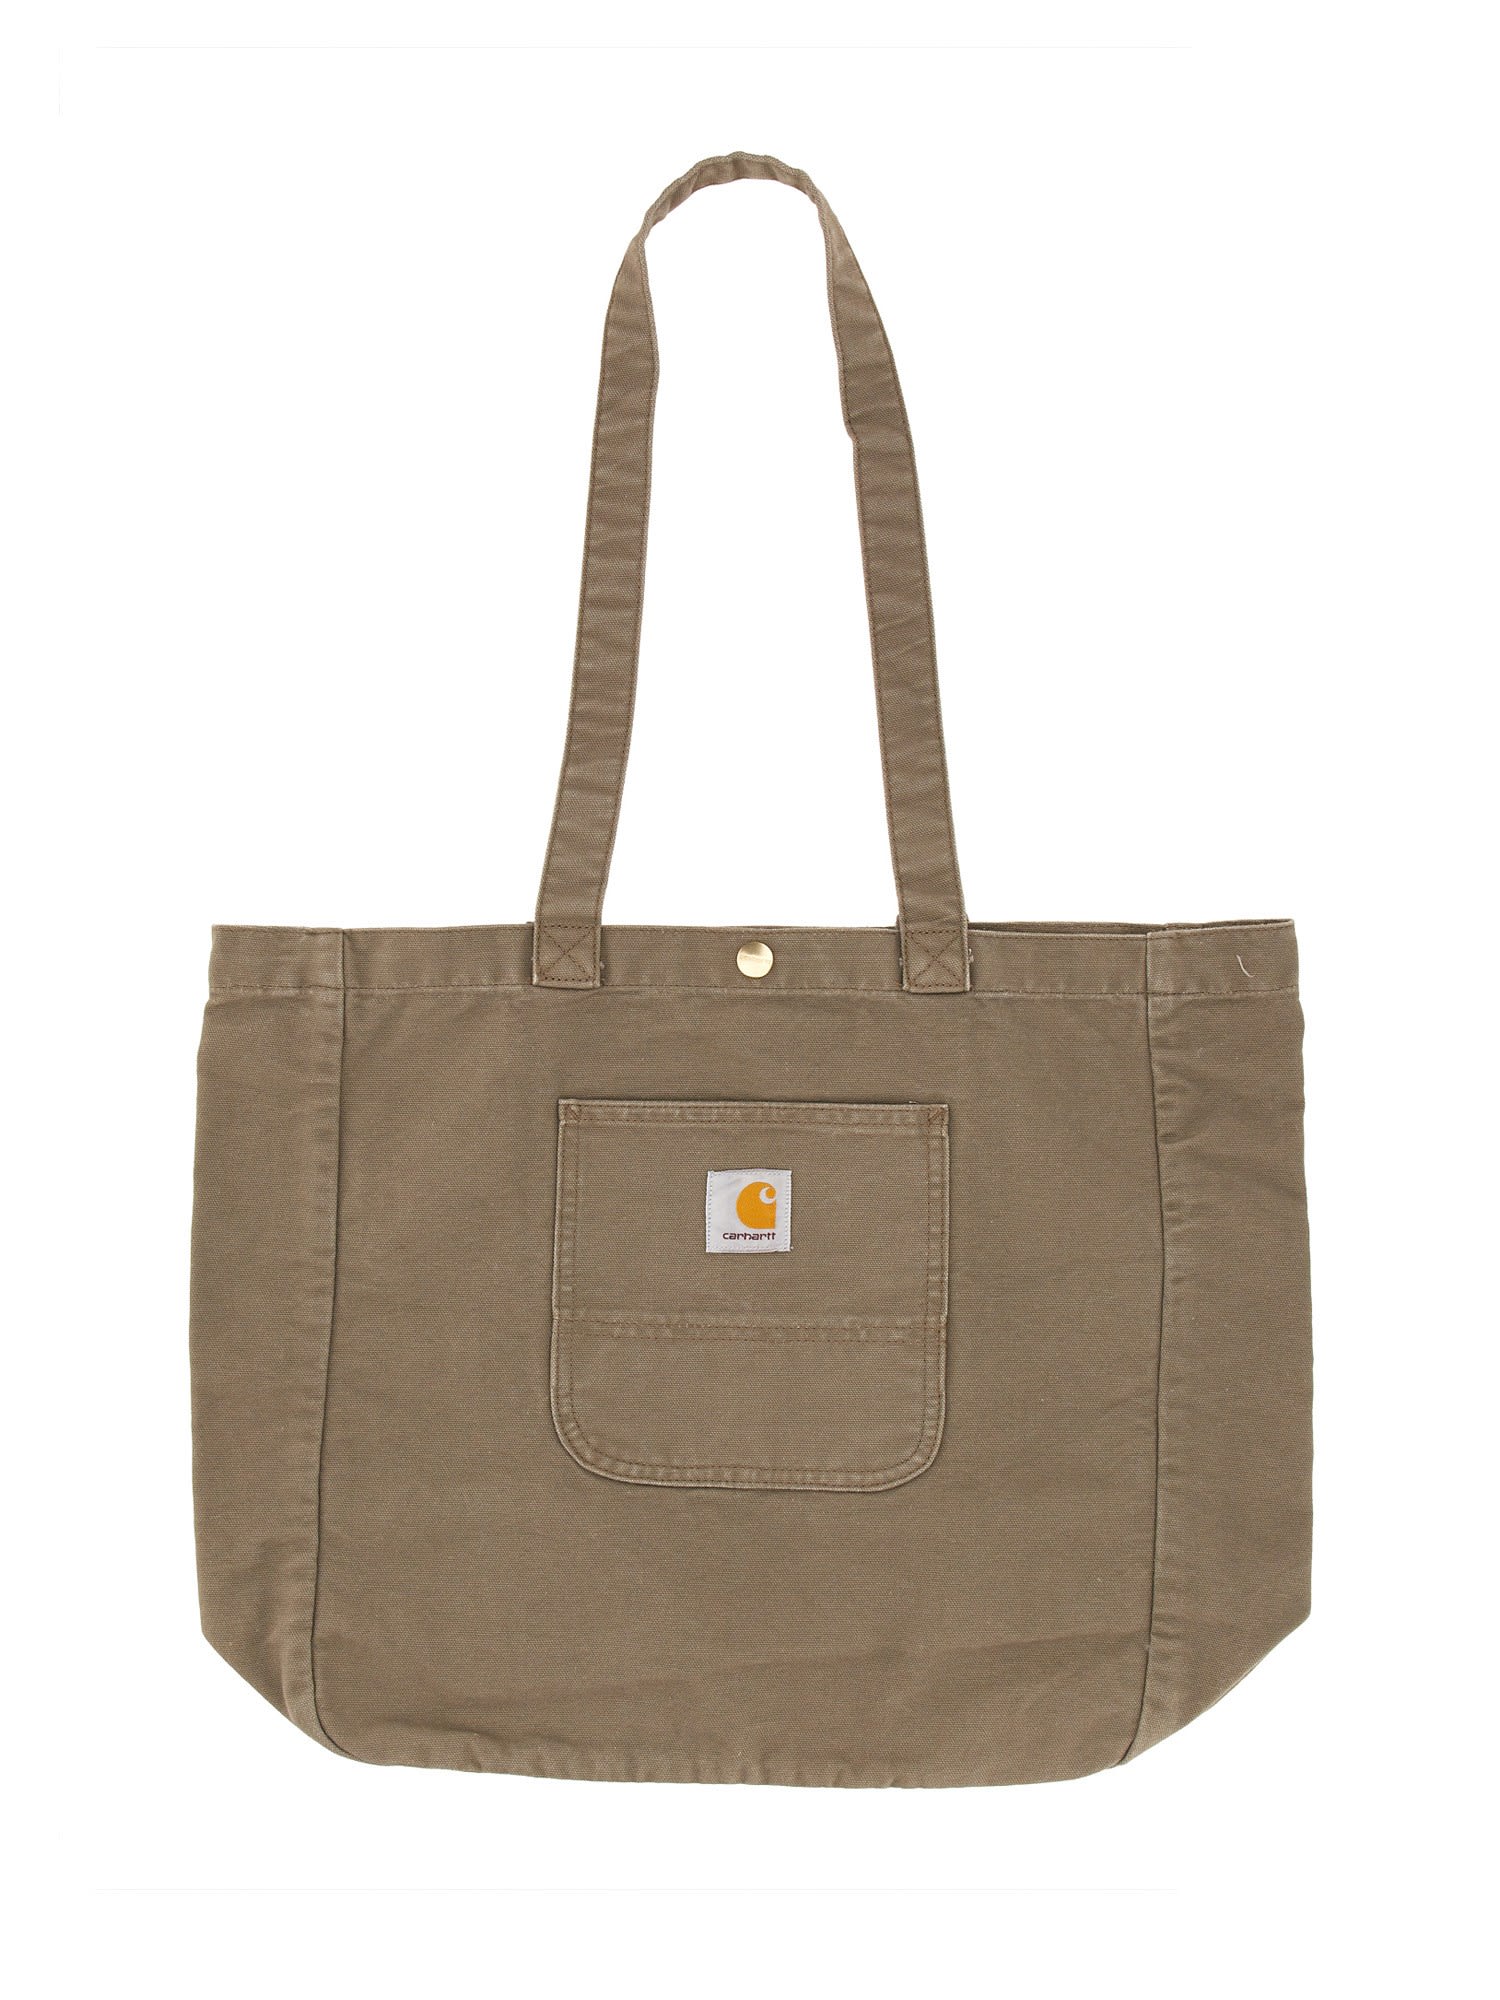 CARHARTT TOTE BAG WITH LOGO